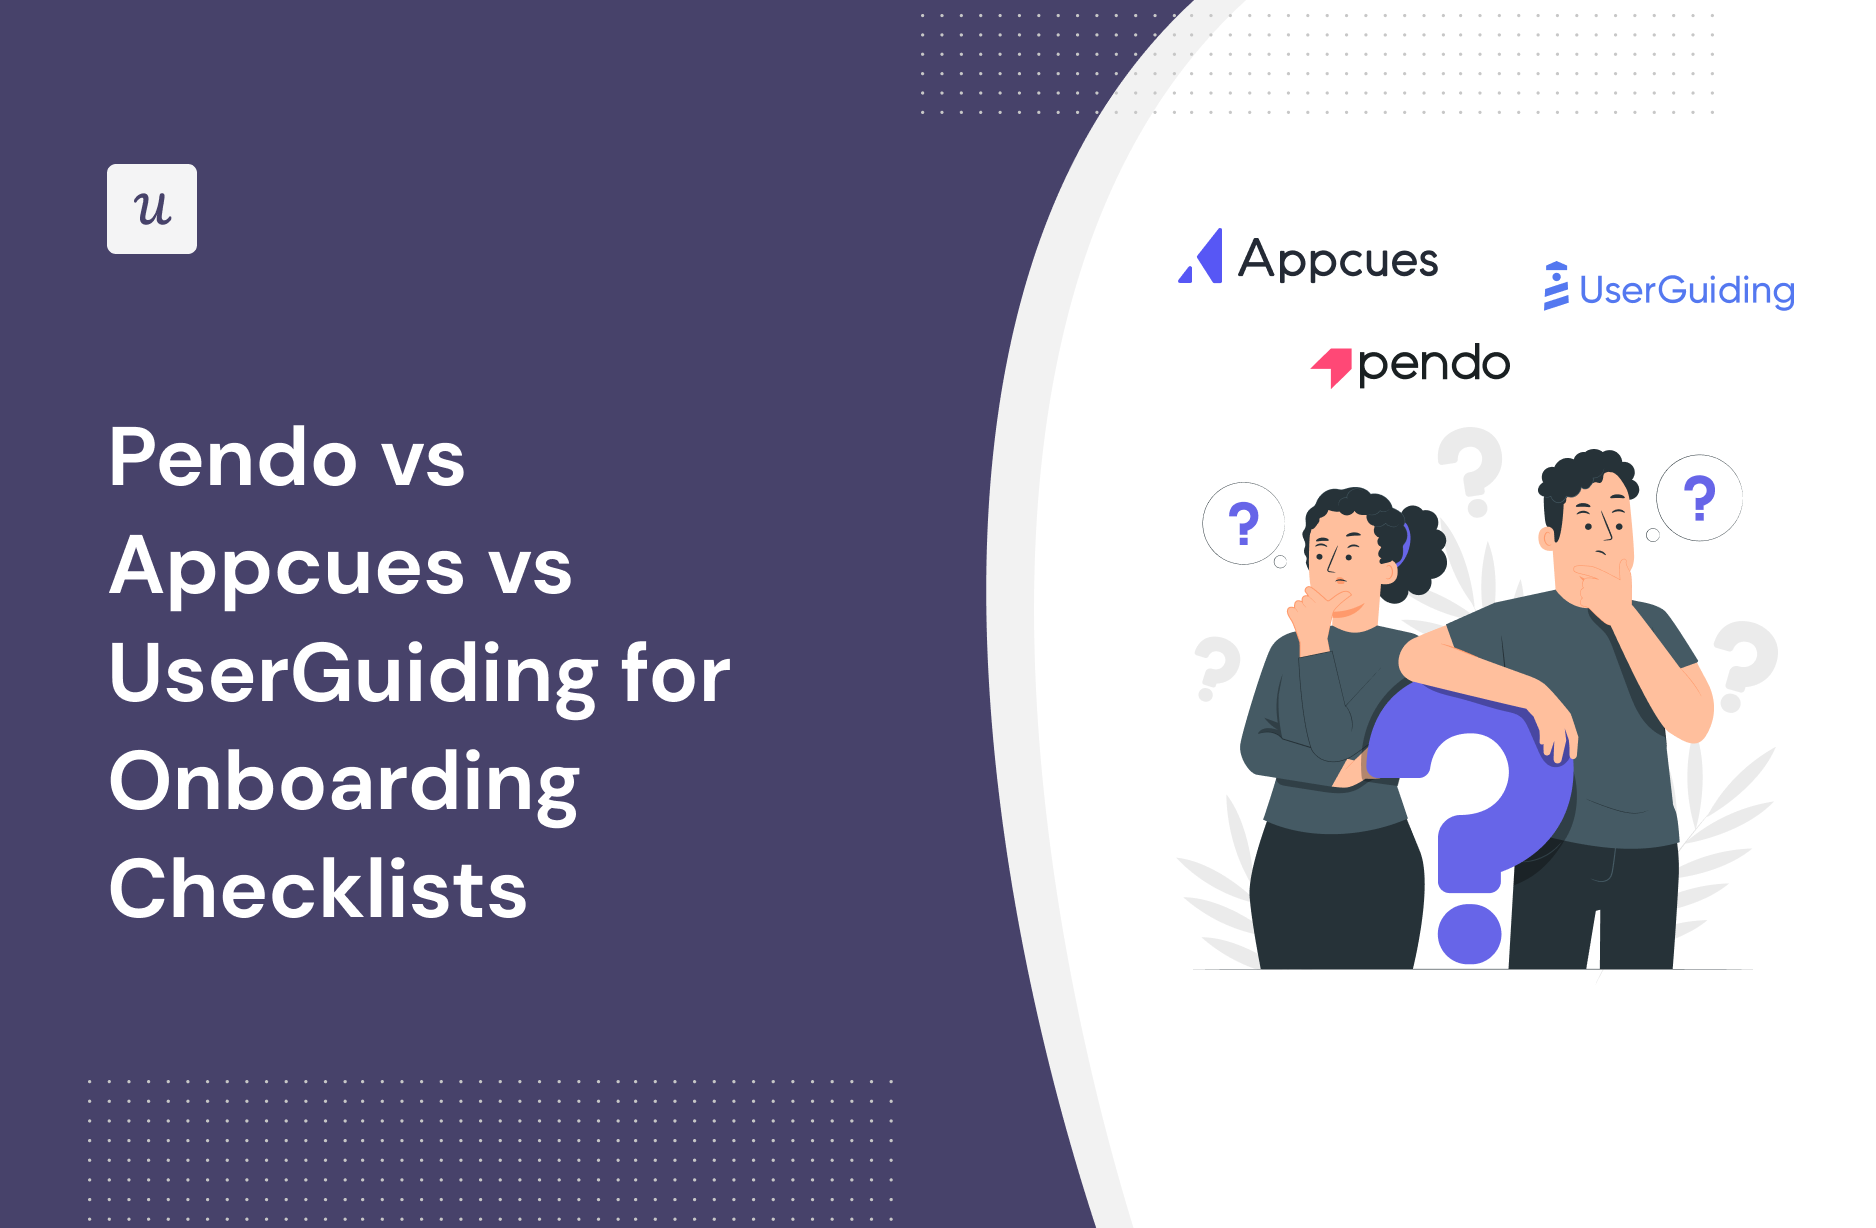 Pendo vs Appcues vs UserGuiding for Onboarding Checklists